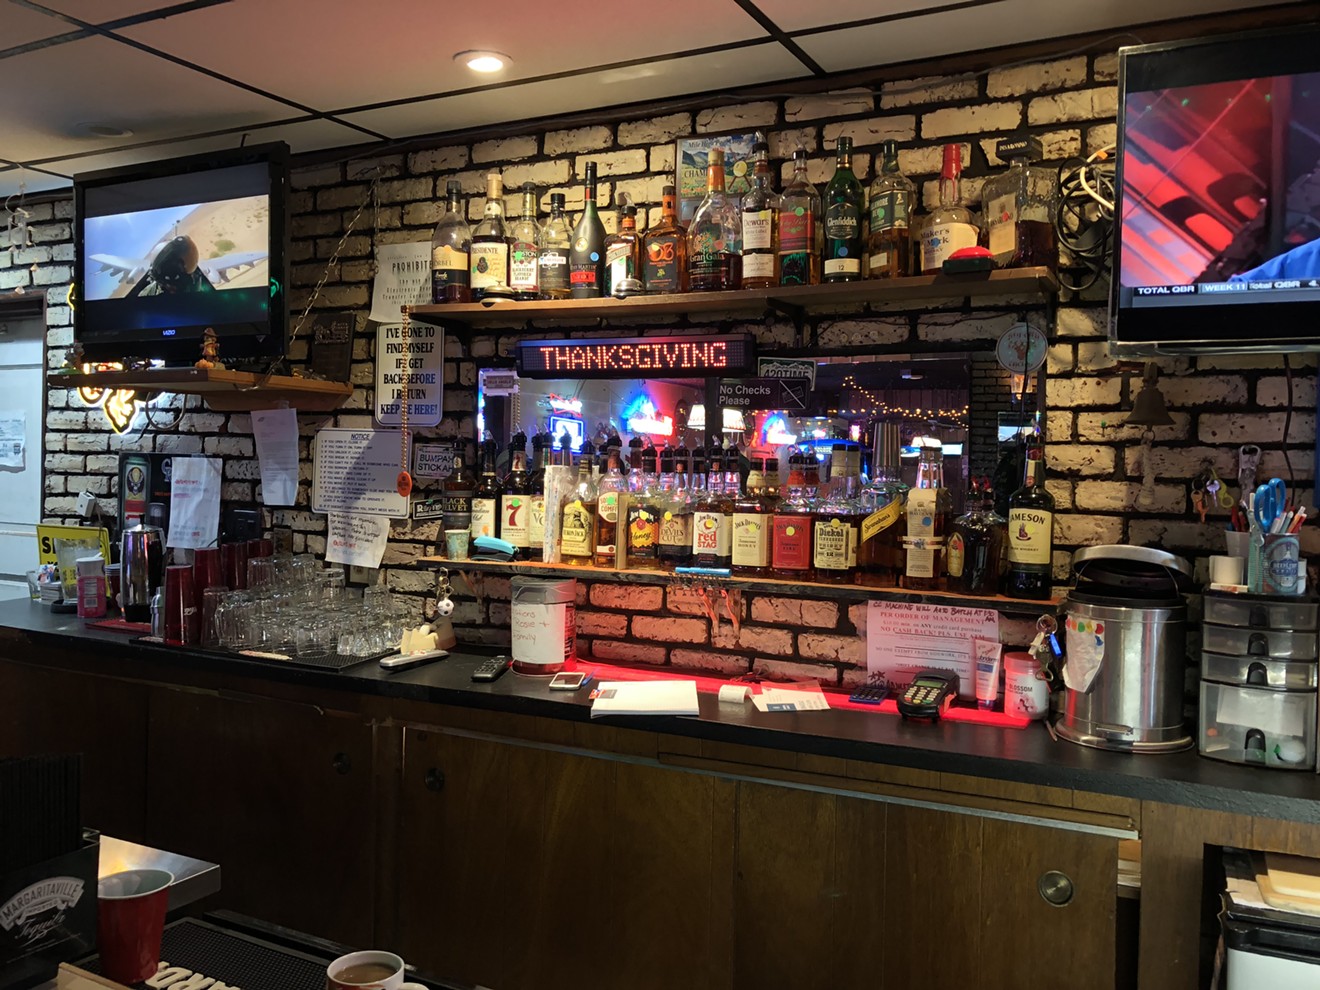 If you look closely, you can see the color-coded dots on each bottle of liquor behind the bar at Riley's Inn.